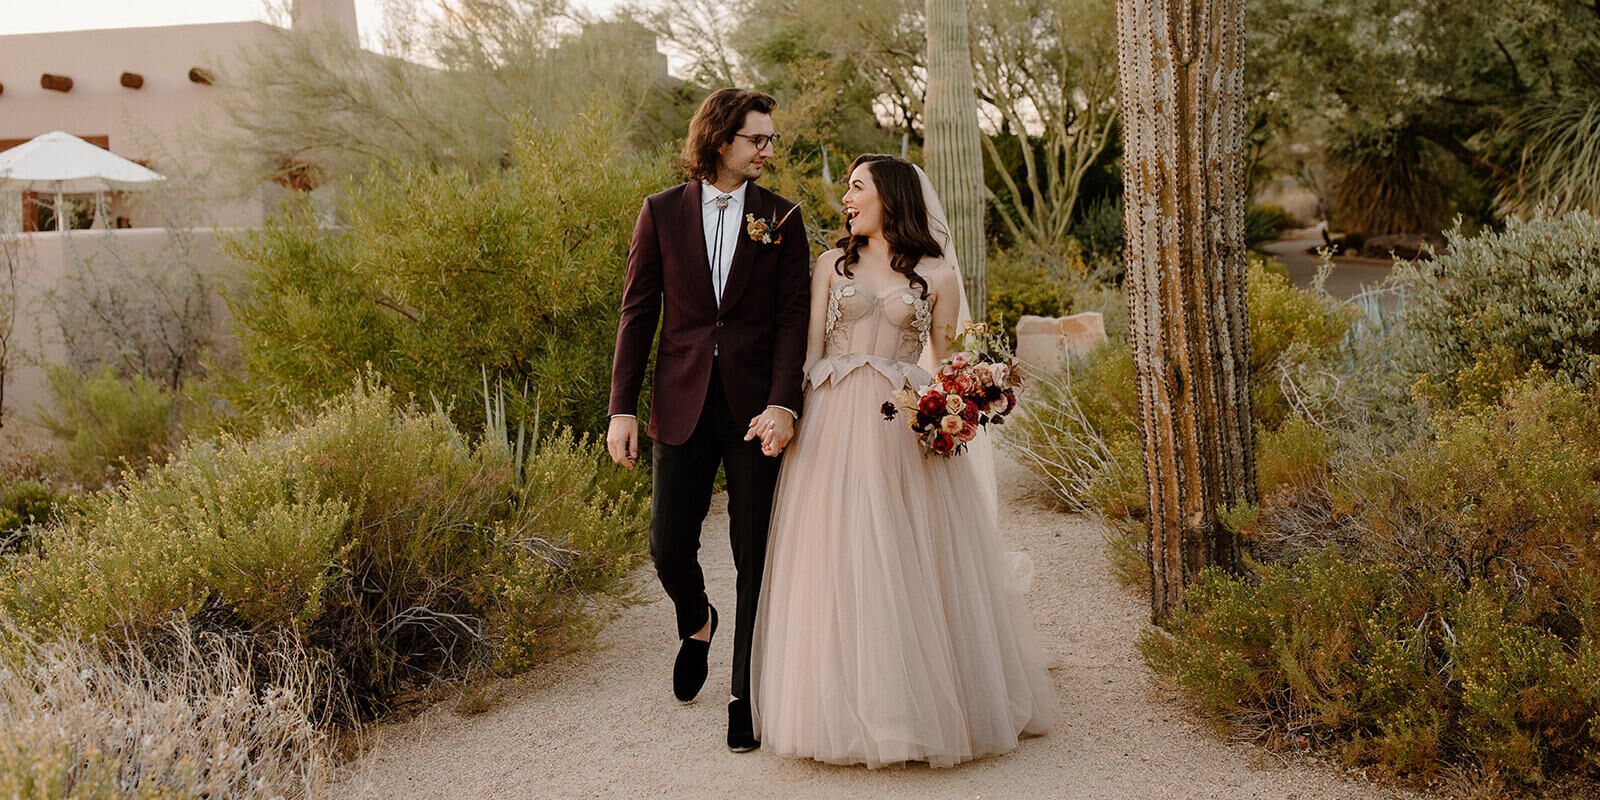 Wedding vendor: See more from Hannah and Tim's desert wedding